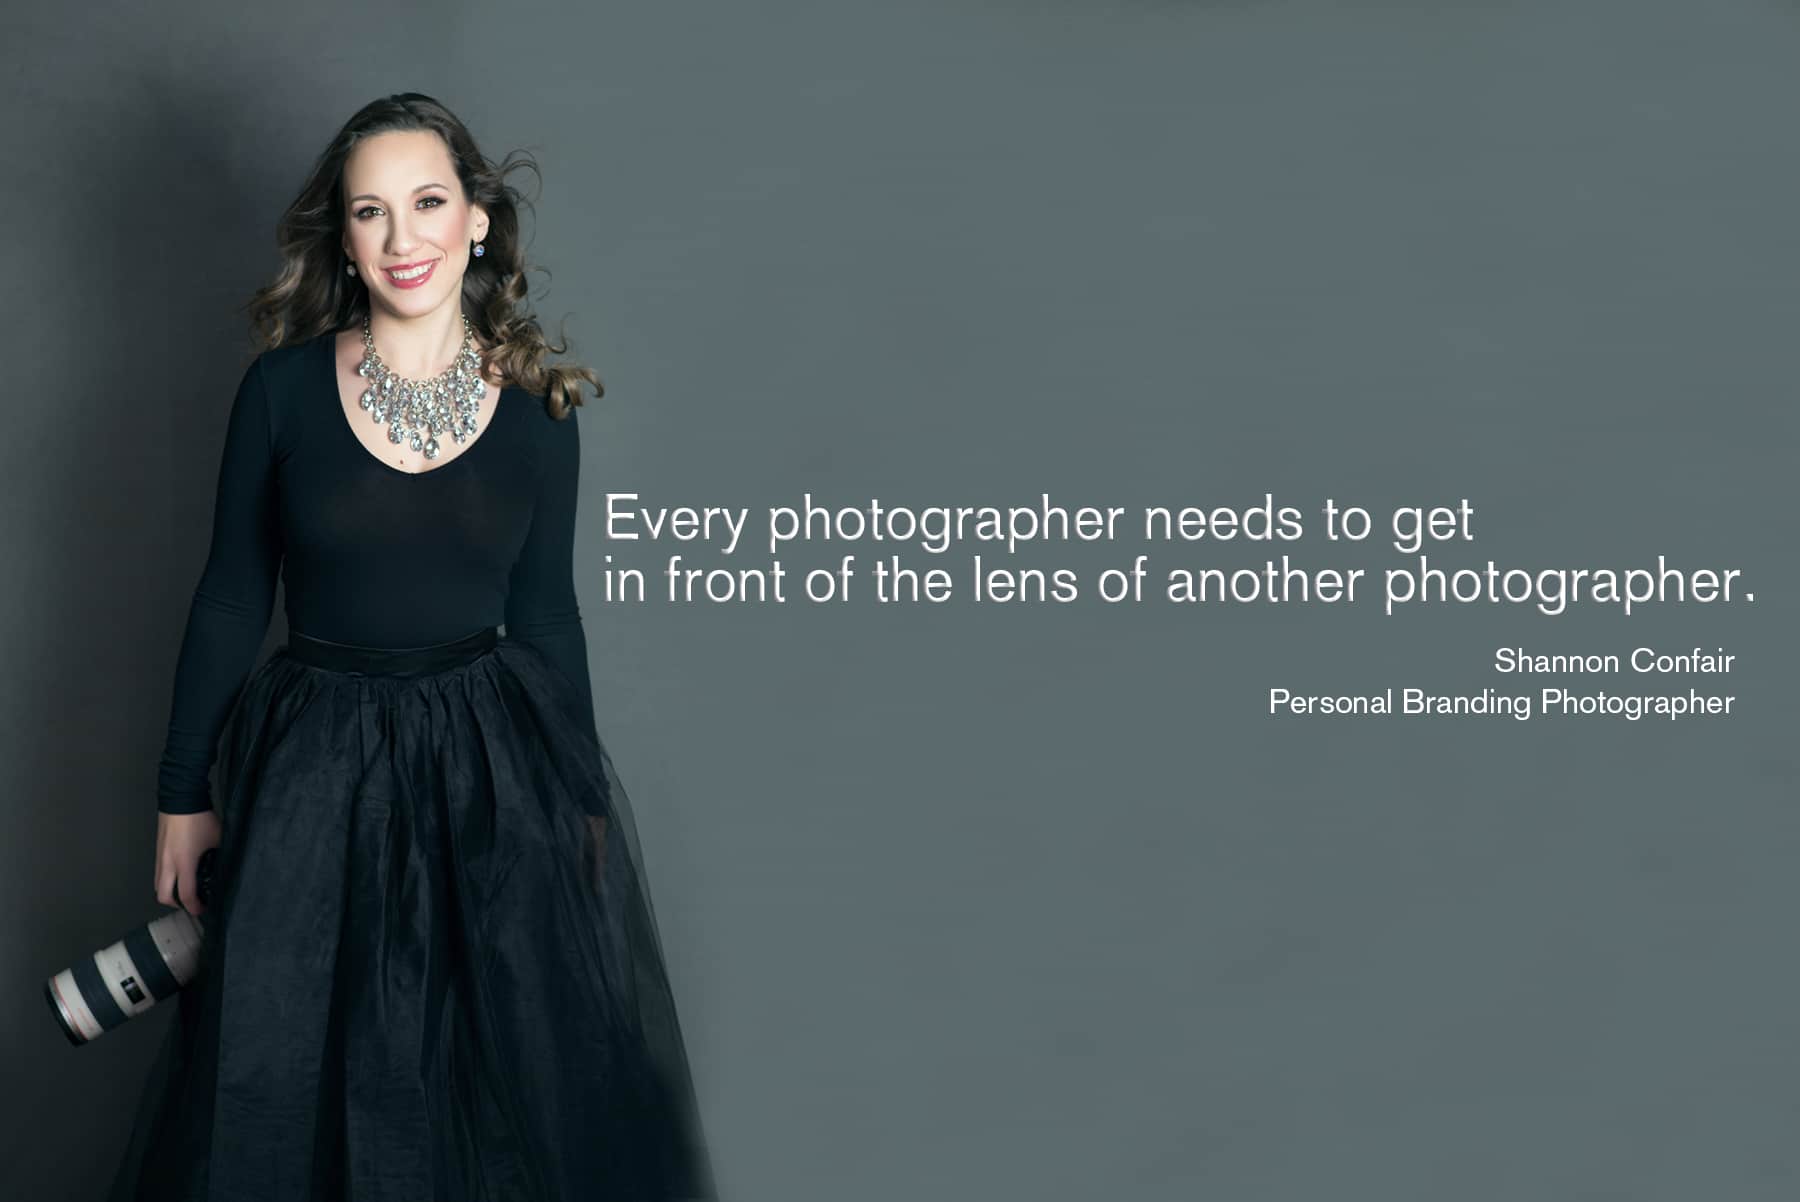 Personal branding photographer Shannon Confair by Shannon Hemauer Photography Dillsburg PA